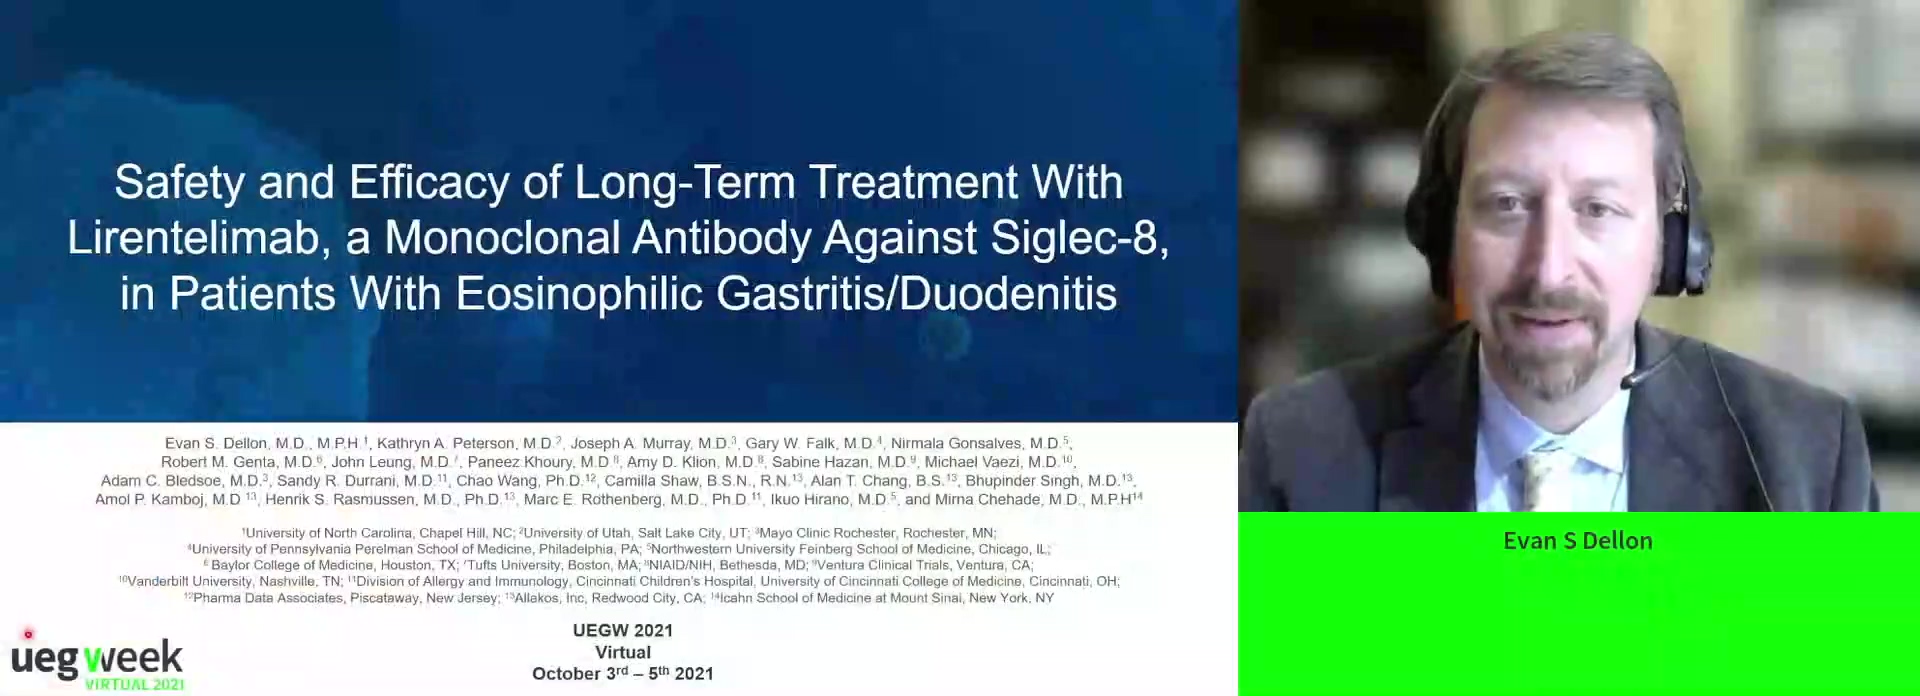 SAFETY AND EFFICACY OF LONG-TERM TREATMENT WITH LIRENTELIMAB, A MONOCLONAL ANTIBODY AGAINST SIGLEC-8, IN PATIENTS WITH EOSINOPHILIC GASTRITIS/DUODENITIS